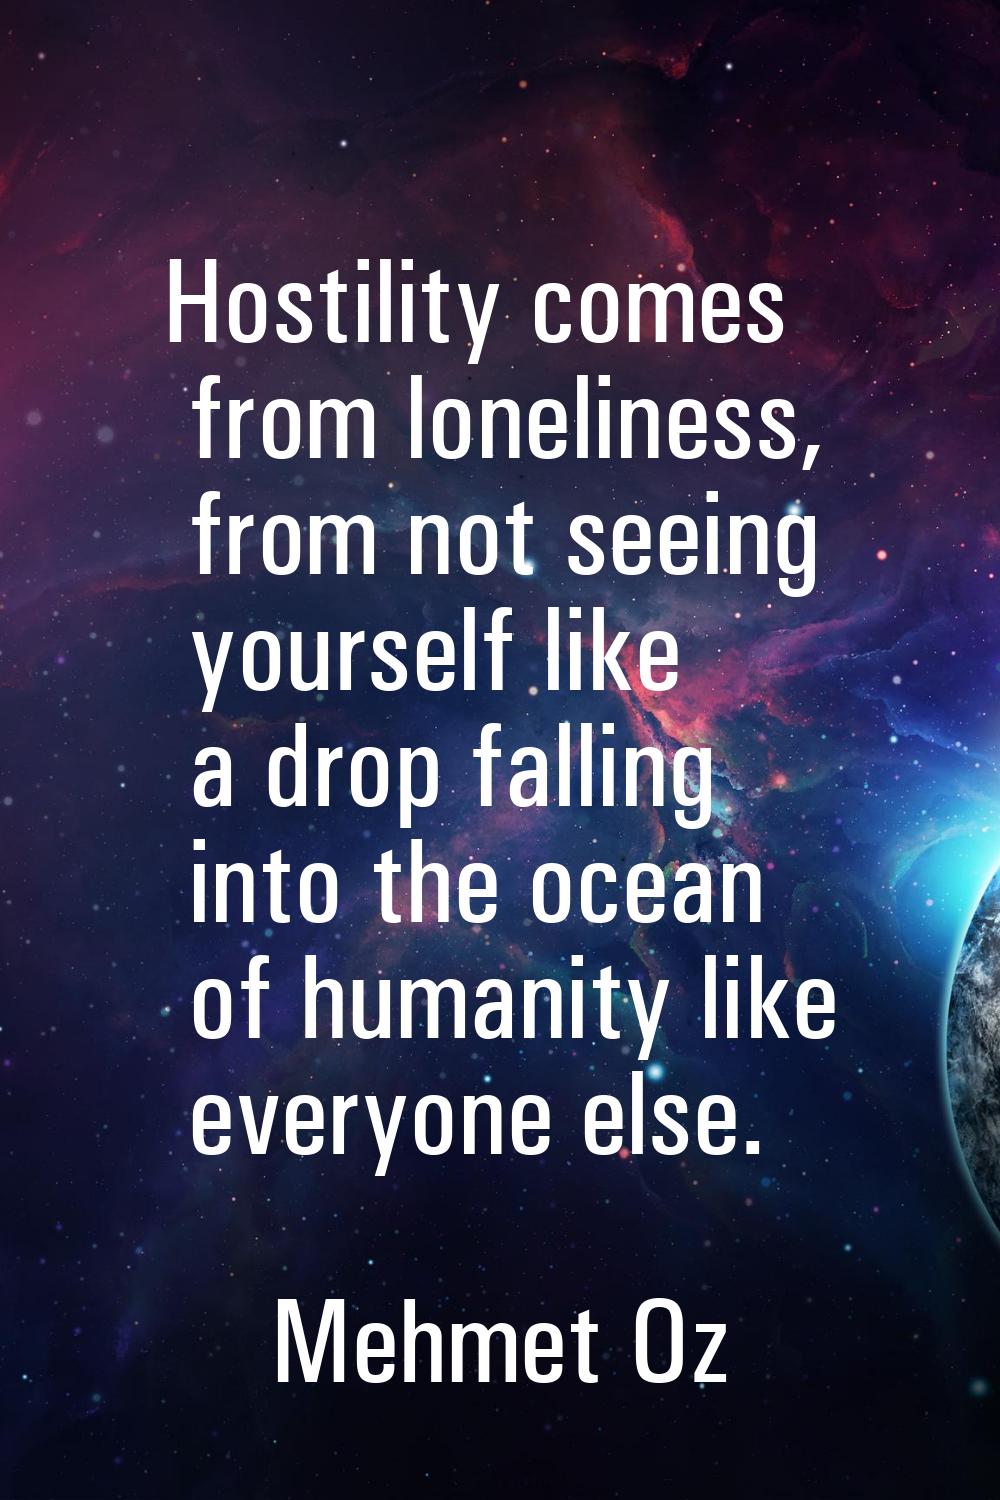 Hostility comes from loneliness, from not seeing yourself like a drop falling into the ocean of hum